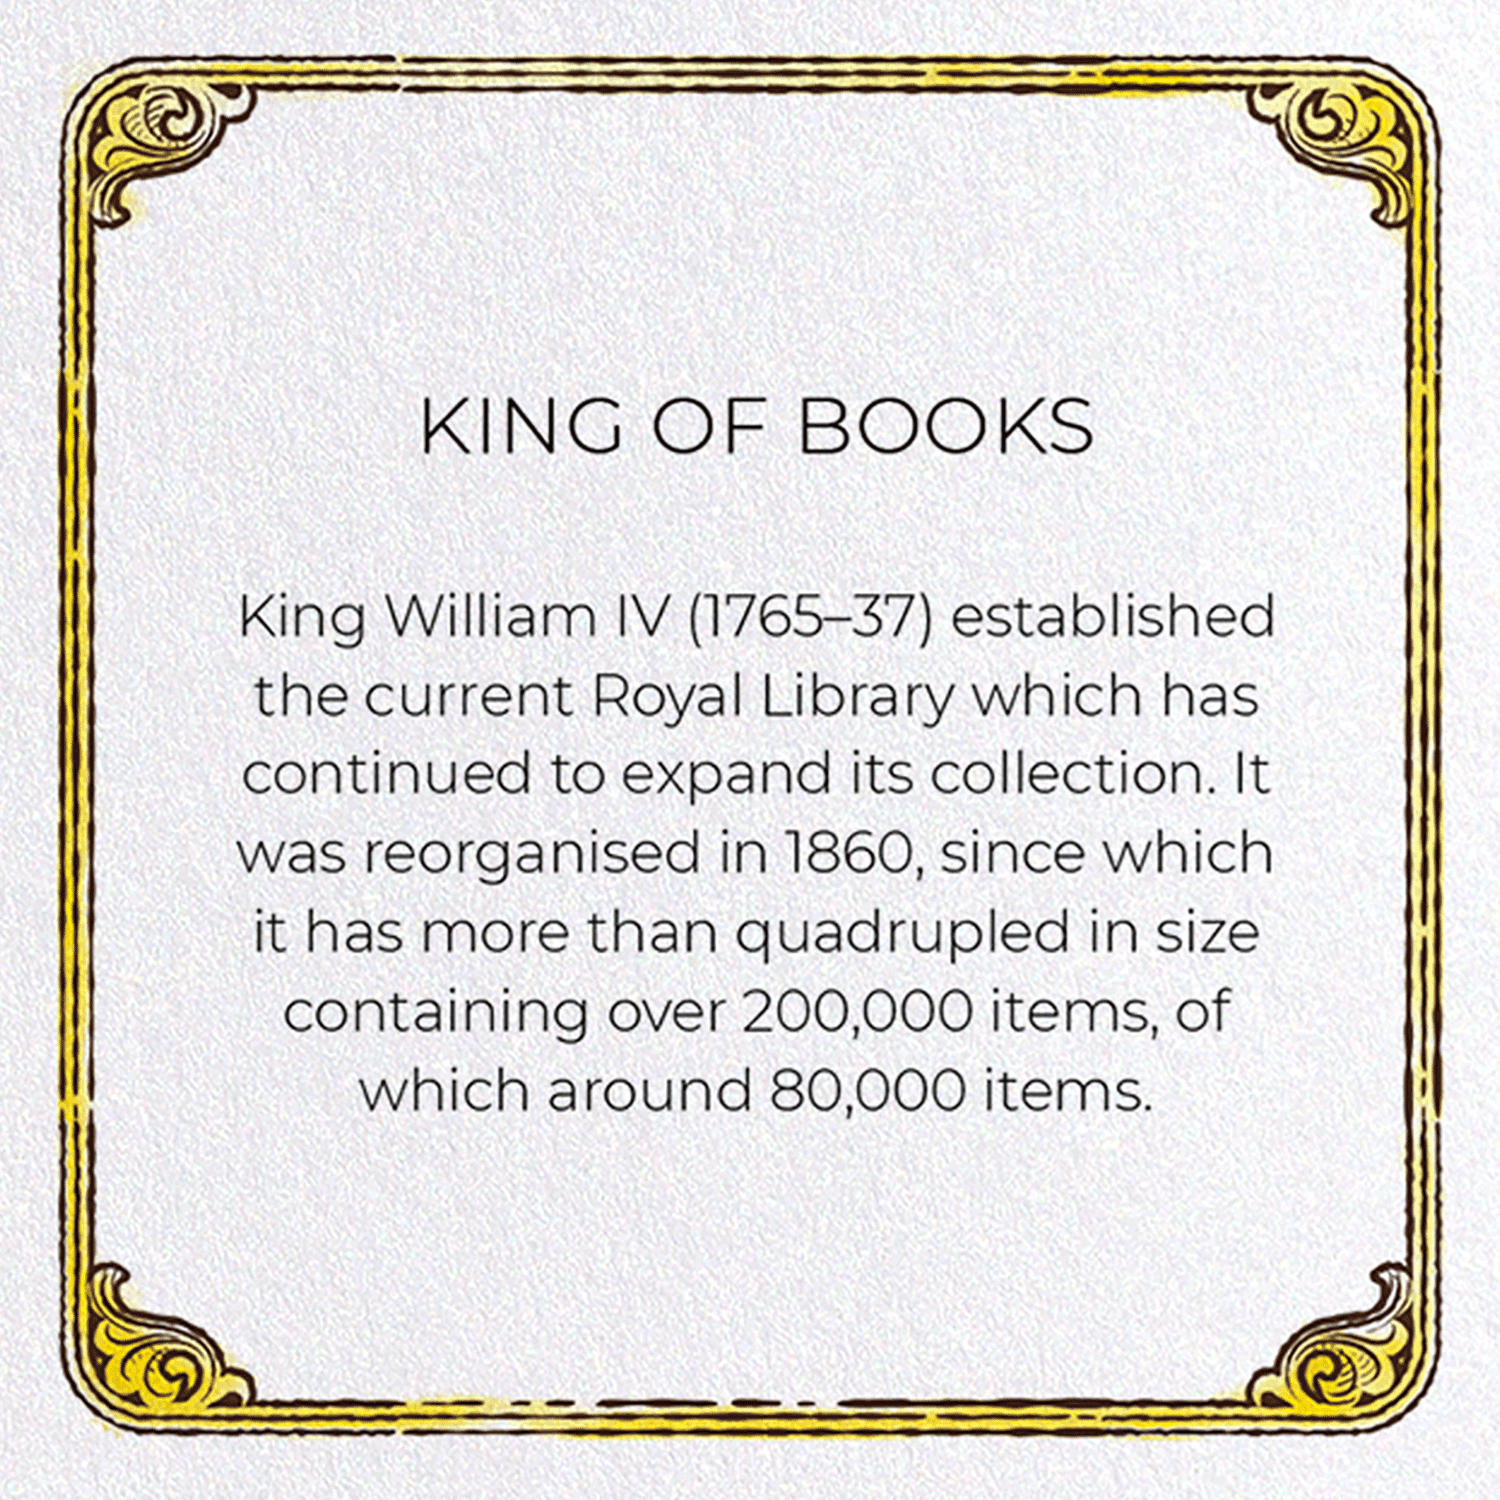 KING OF BOOKS: Victorian Greeting Card